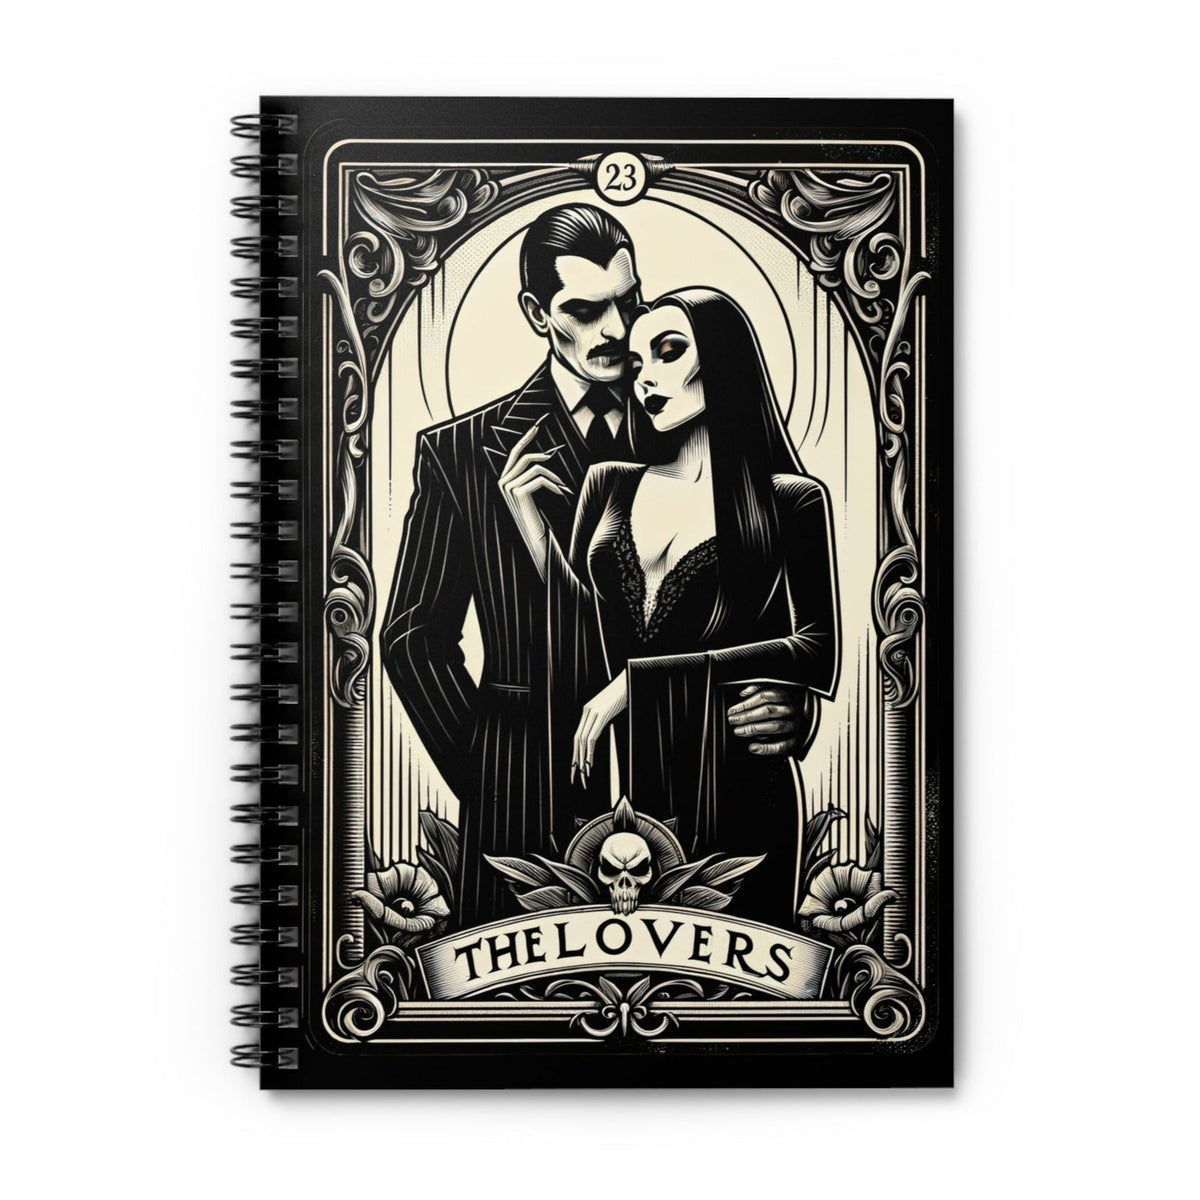 Morticia & Gomez 'The Lovers' Tarot Inspired Notebook - Goth Cloth Co.Paper products72619713921965784962